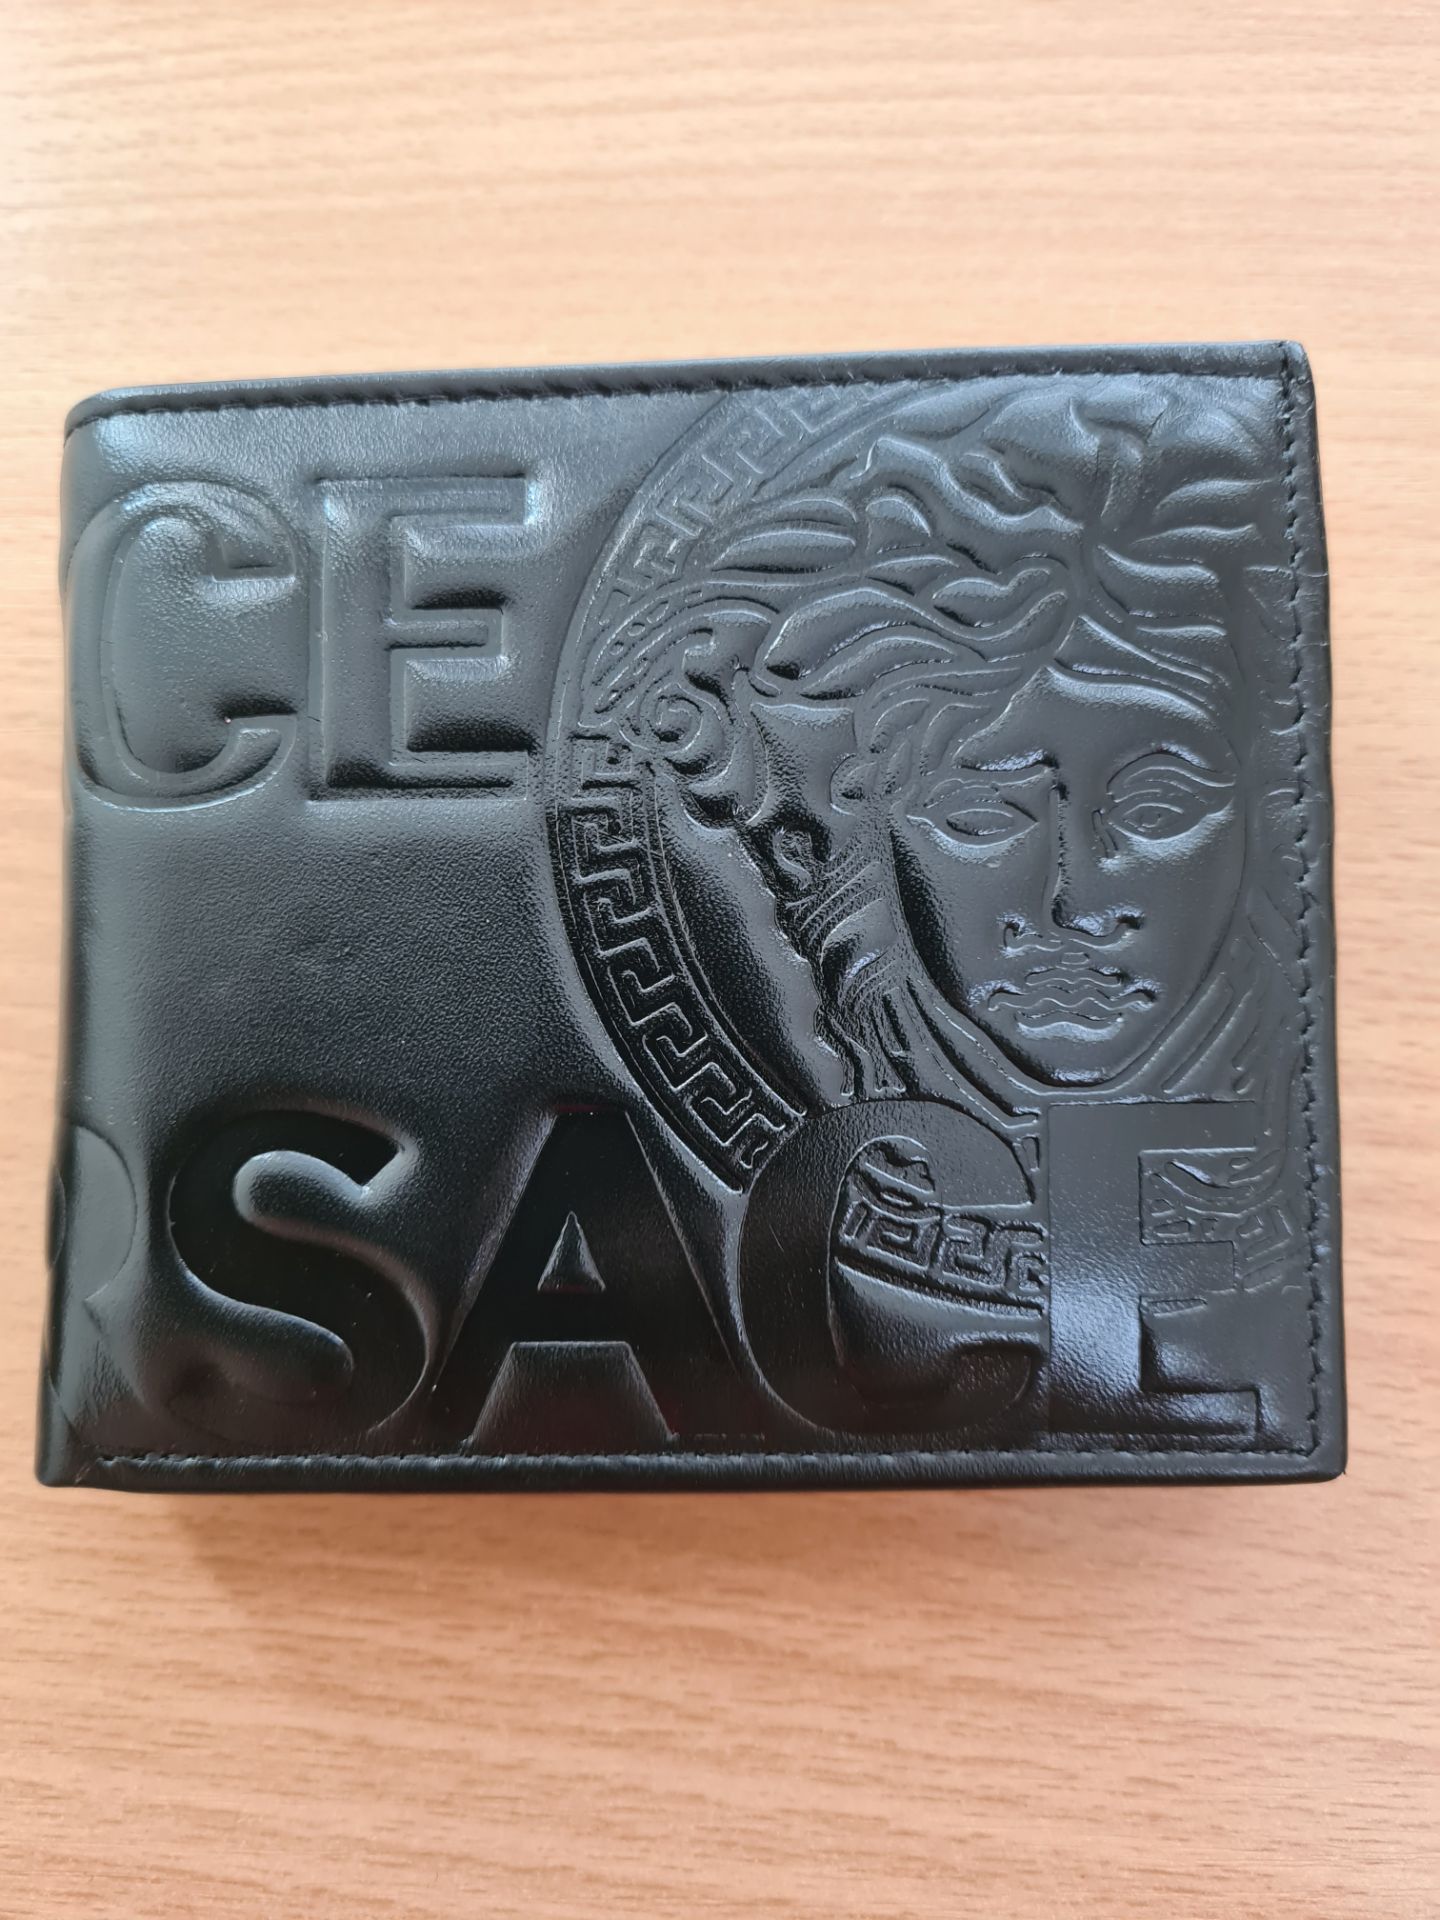 versace men's leather wallet - new with box